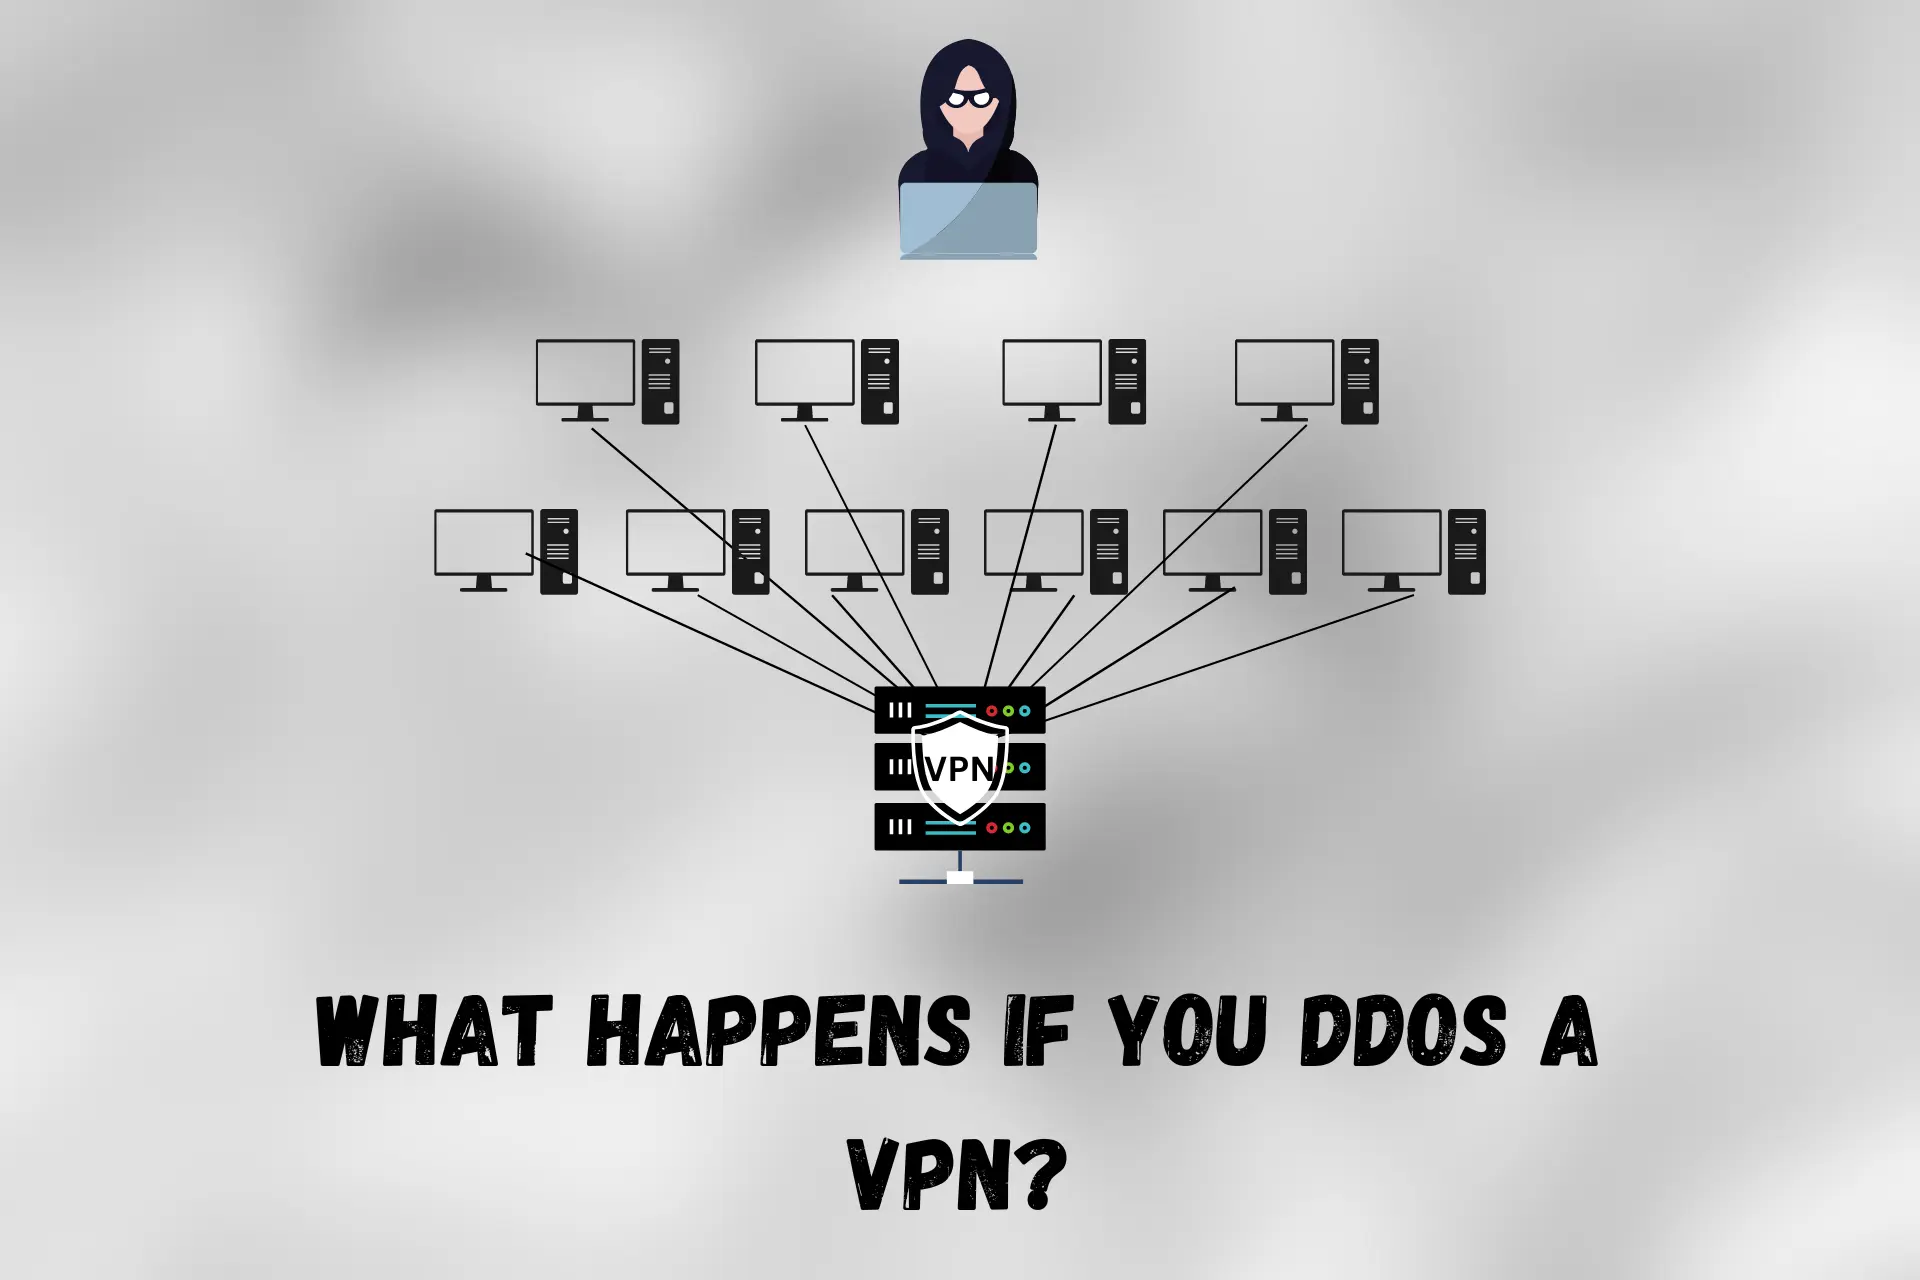 what happens if you ddos a VPN